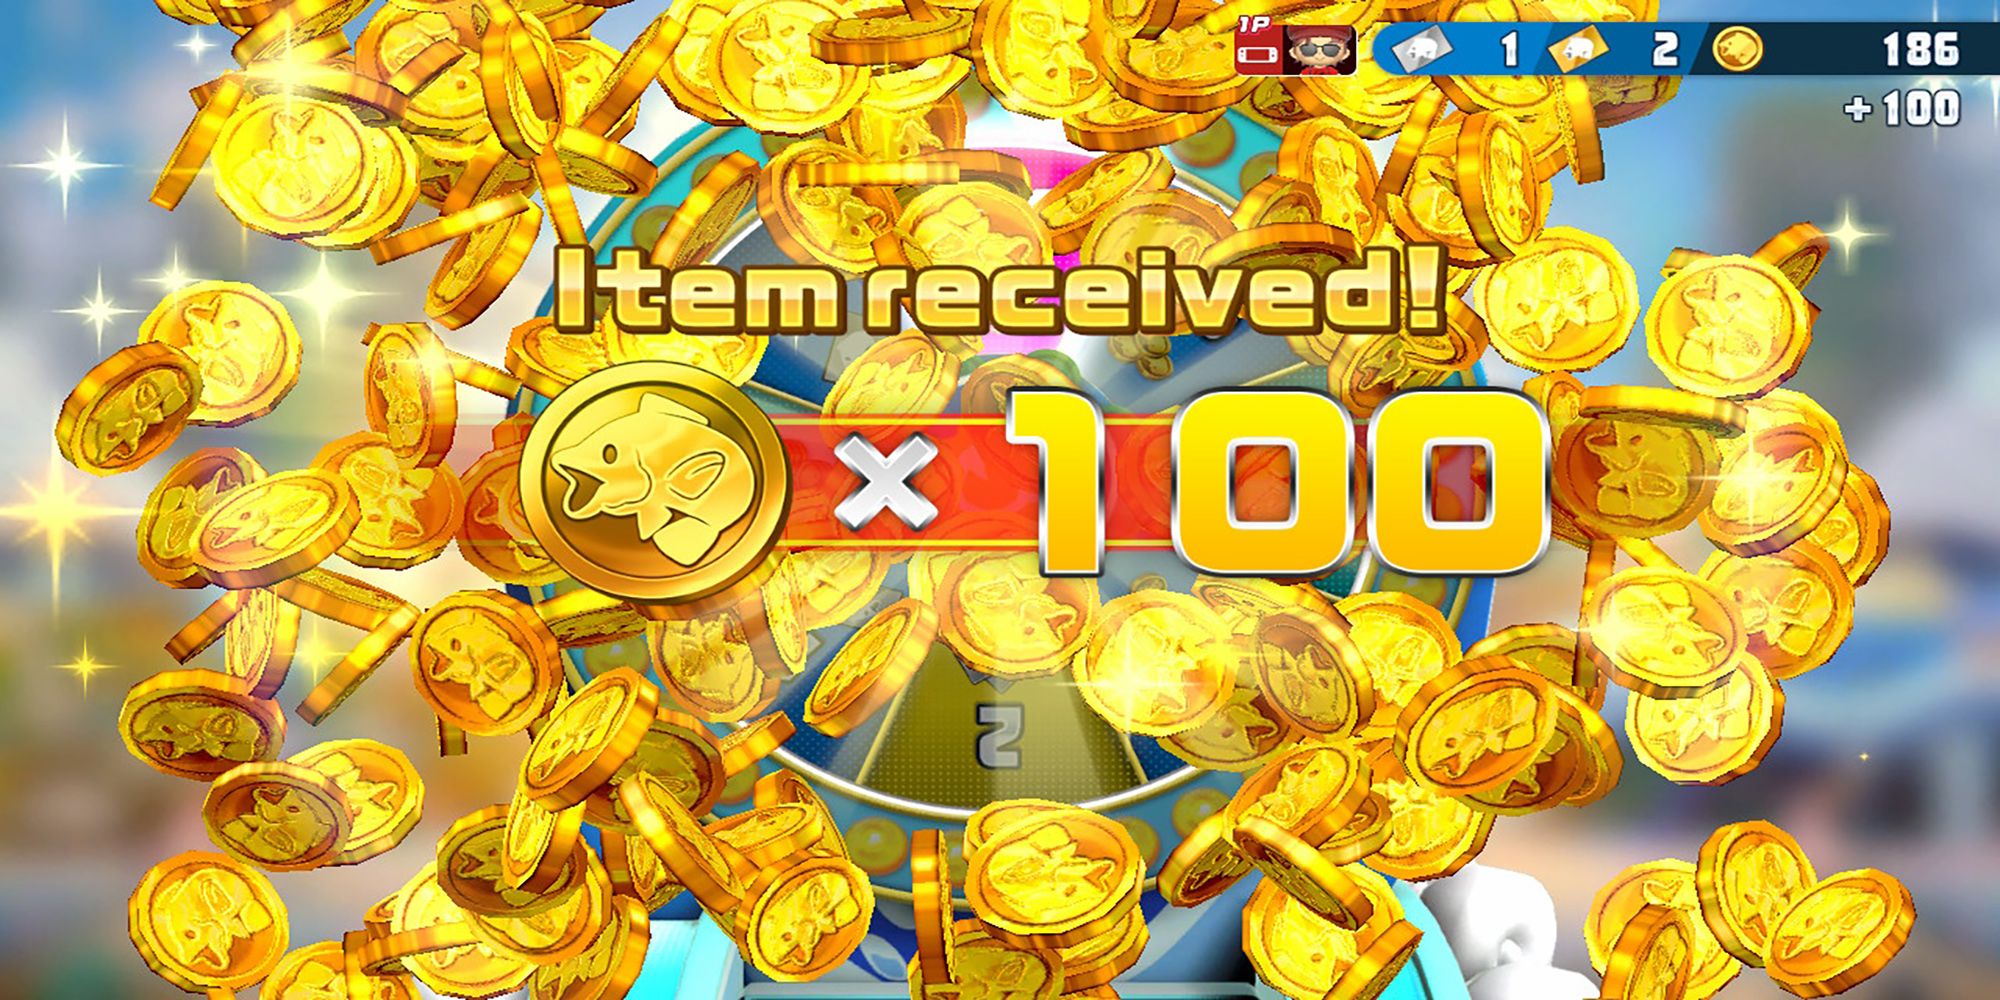 Medals burst from the Lucky Roulette machine after a successful spin in Ace Angler: Fishing Spirits.